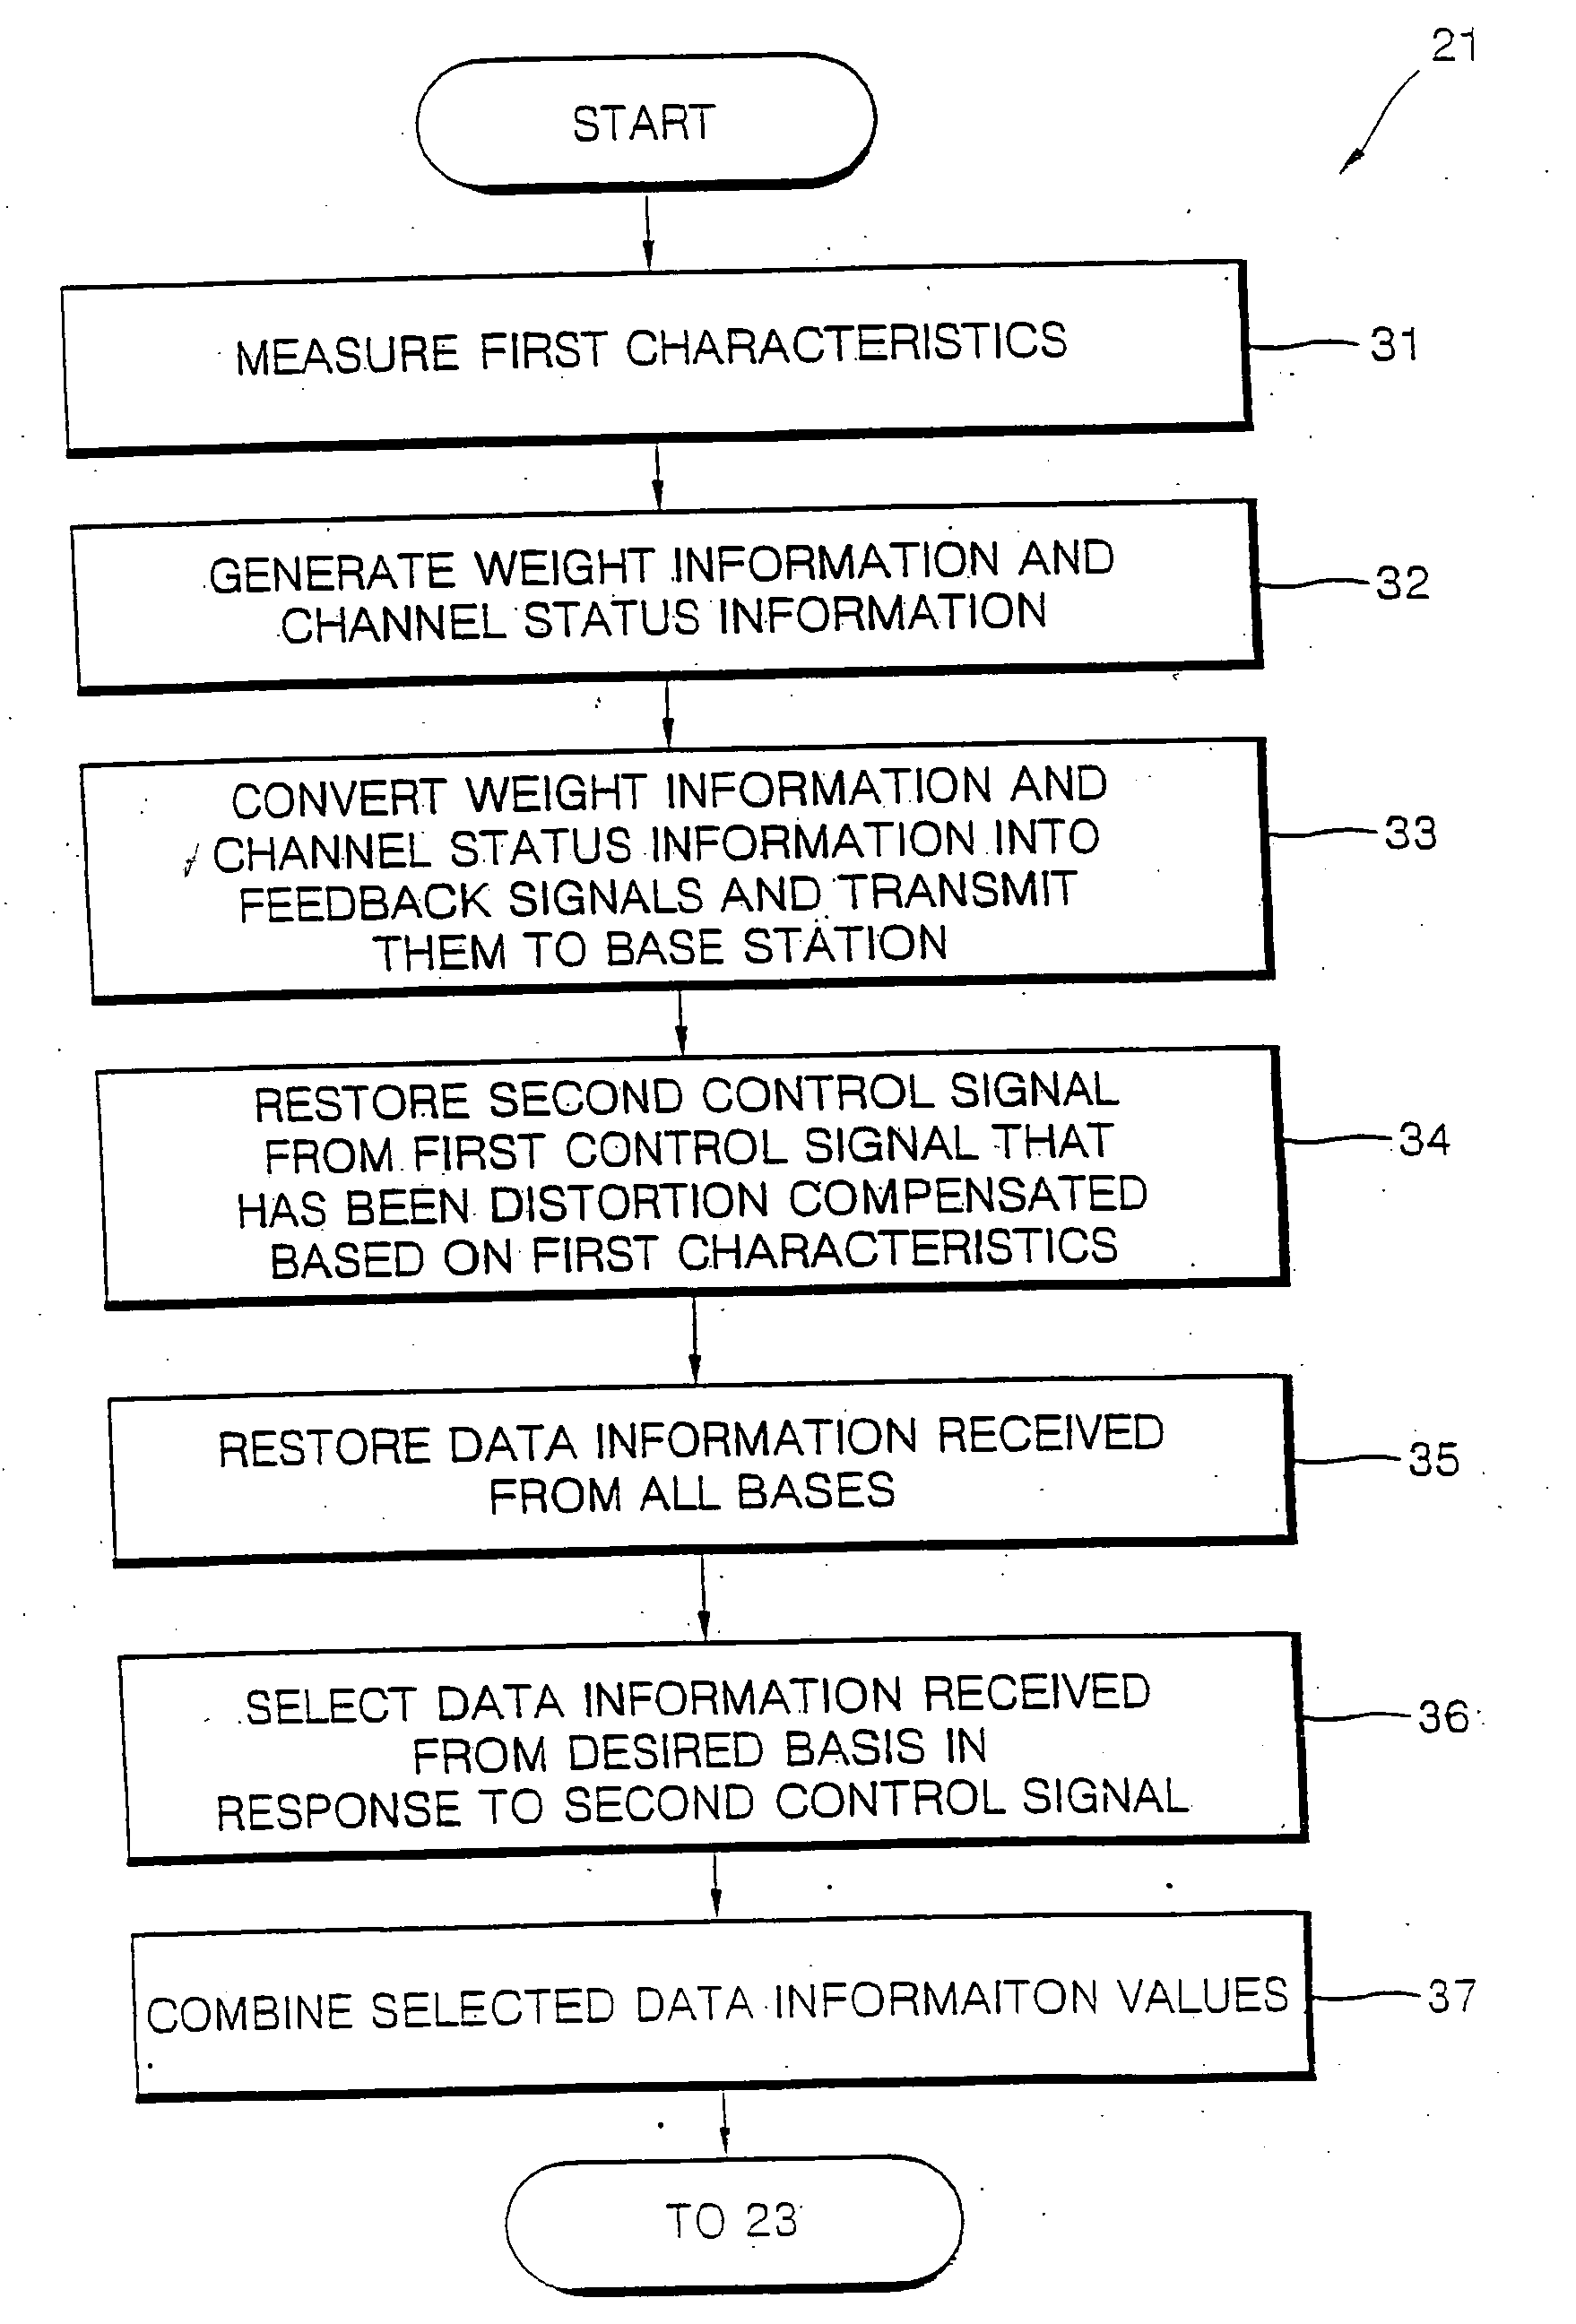 Mobile communication apparatus and method including base station and mobile station having muti-antenna